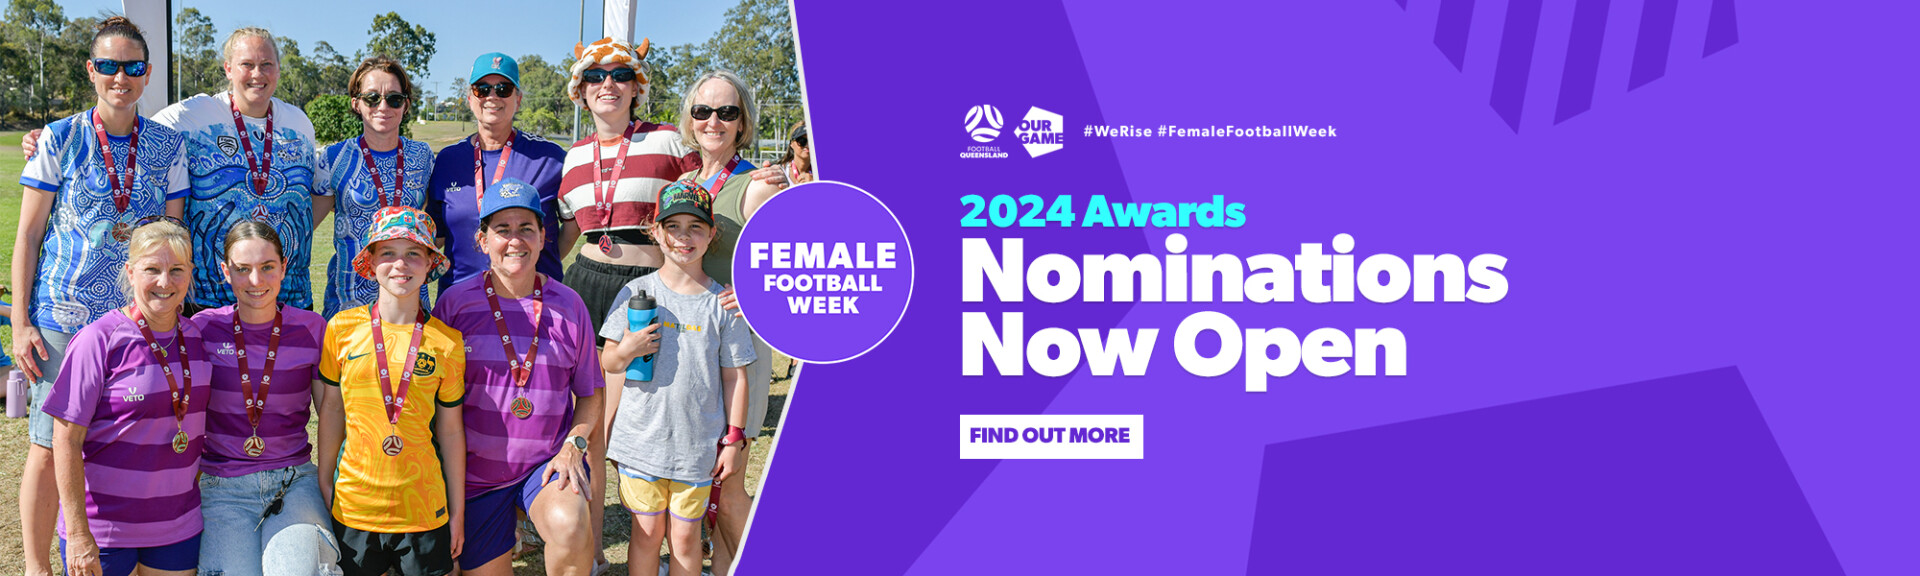 2402 - Campaigns - Female Football Week - Noms Open - Web